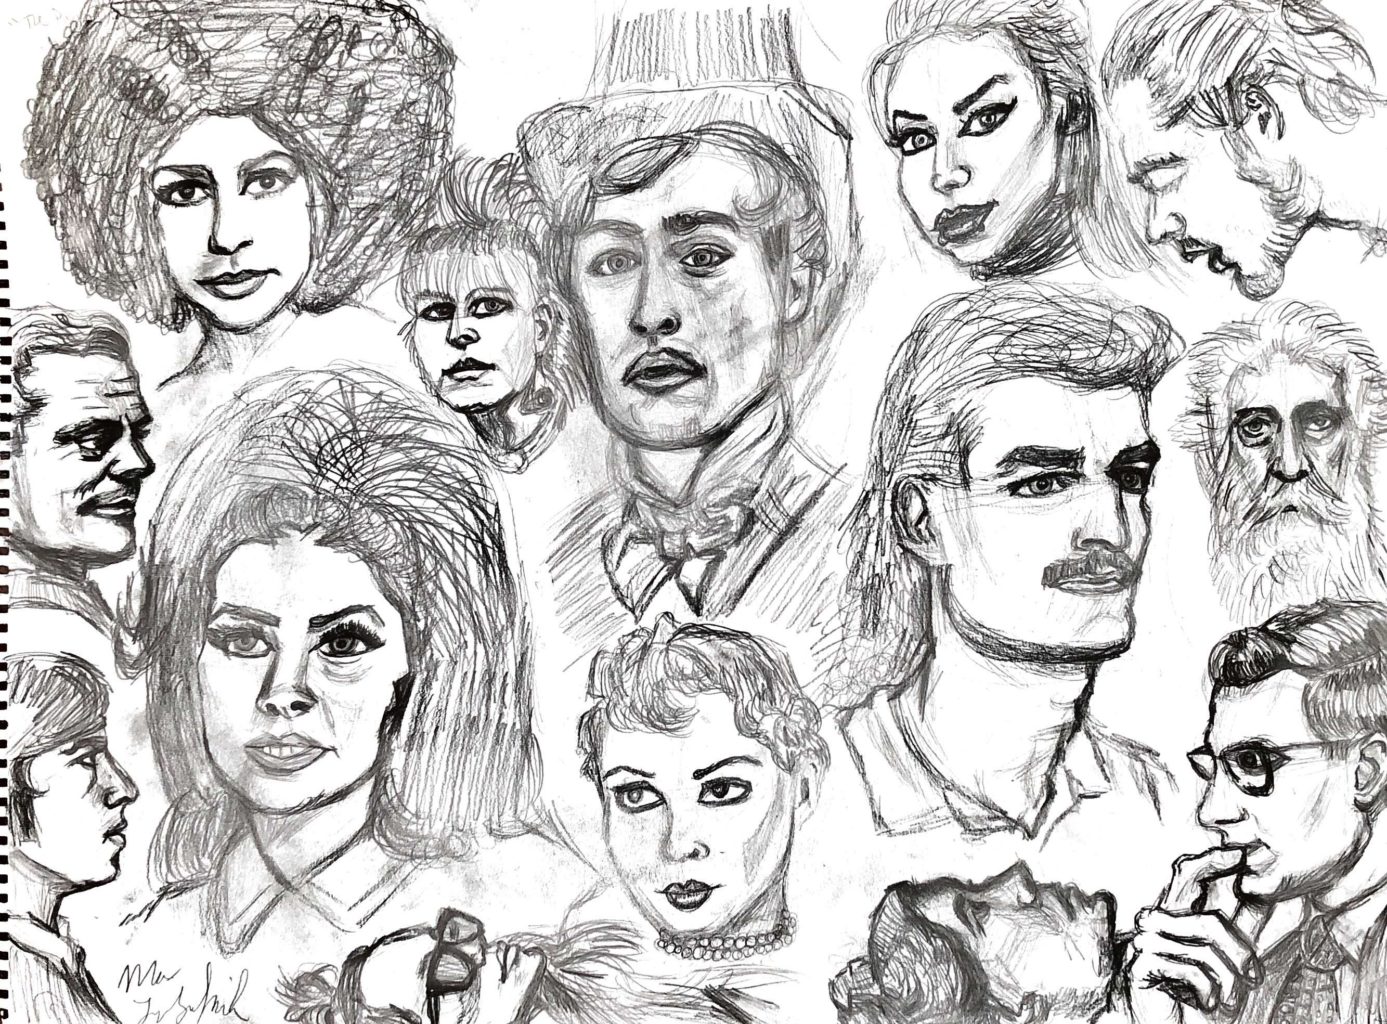 Surrebral A Whole Bunch of F***ing Faces Fucking drawing